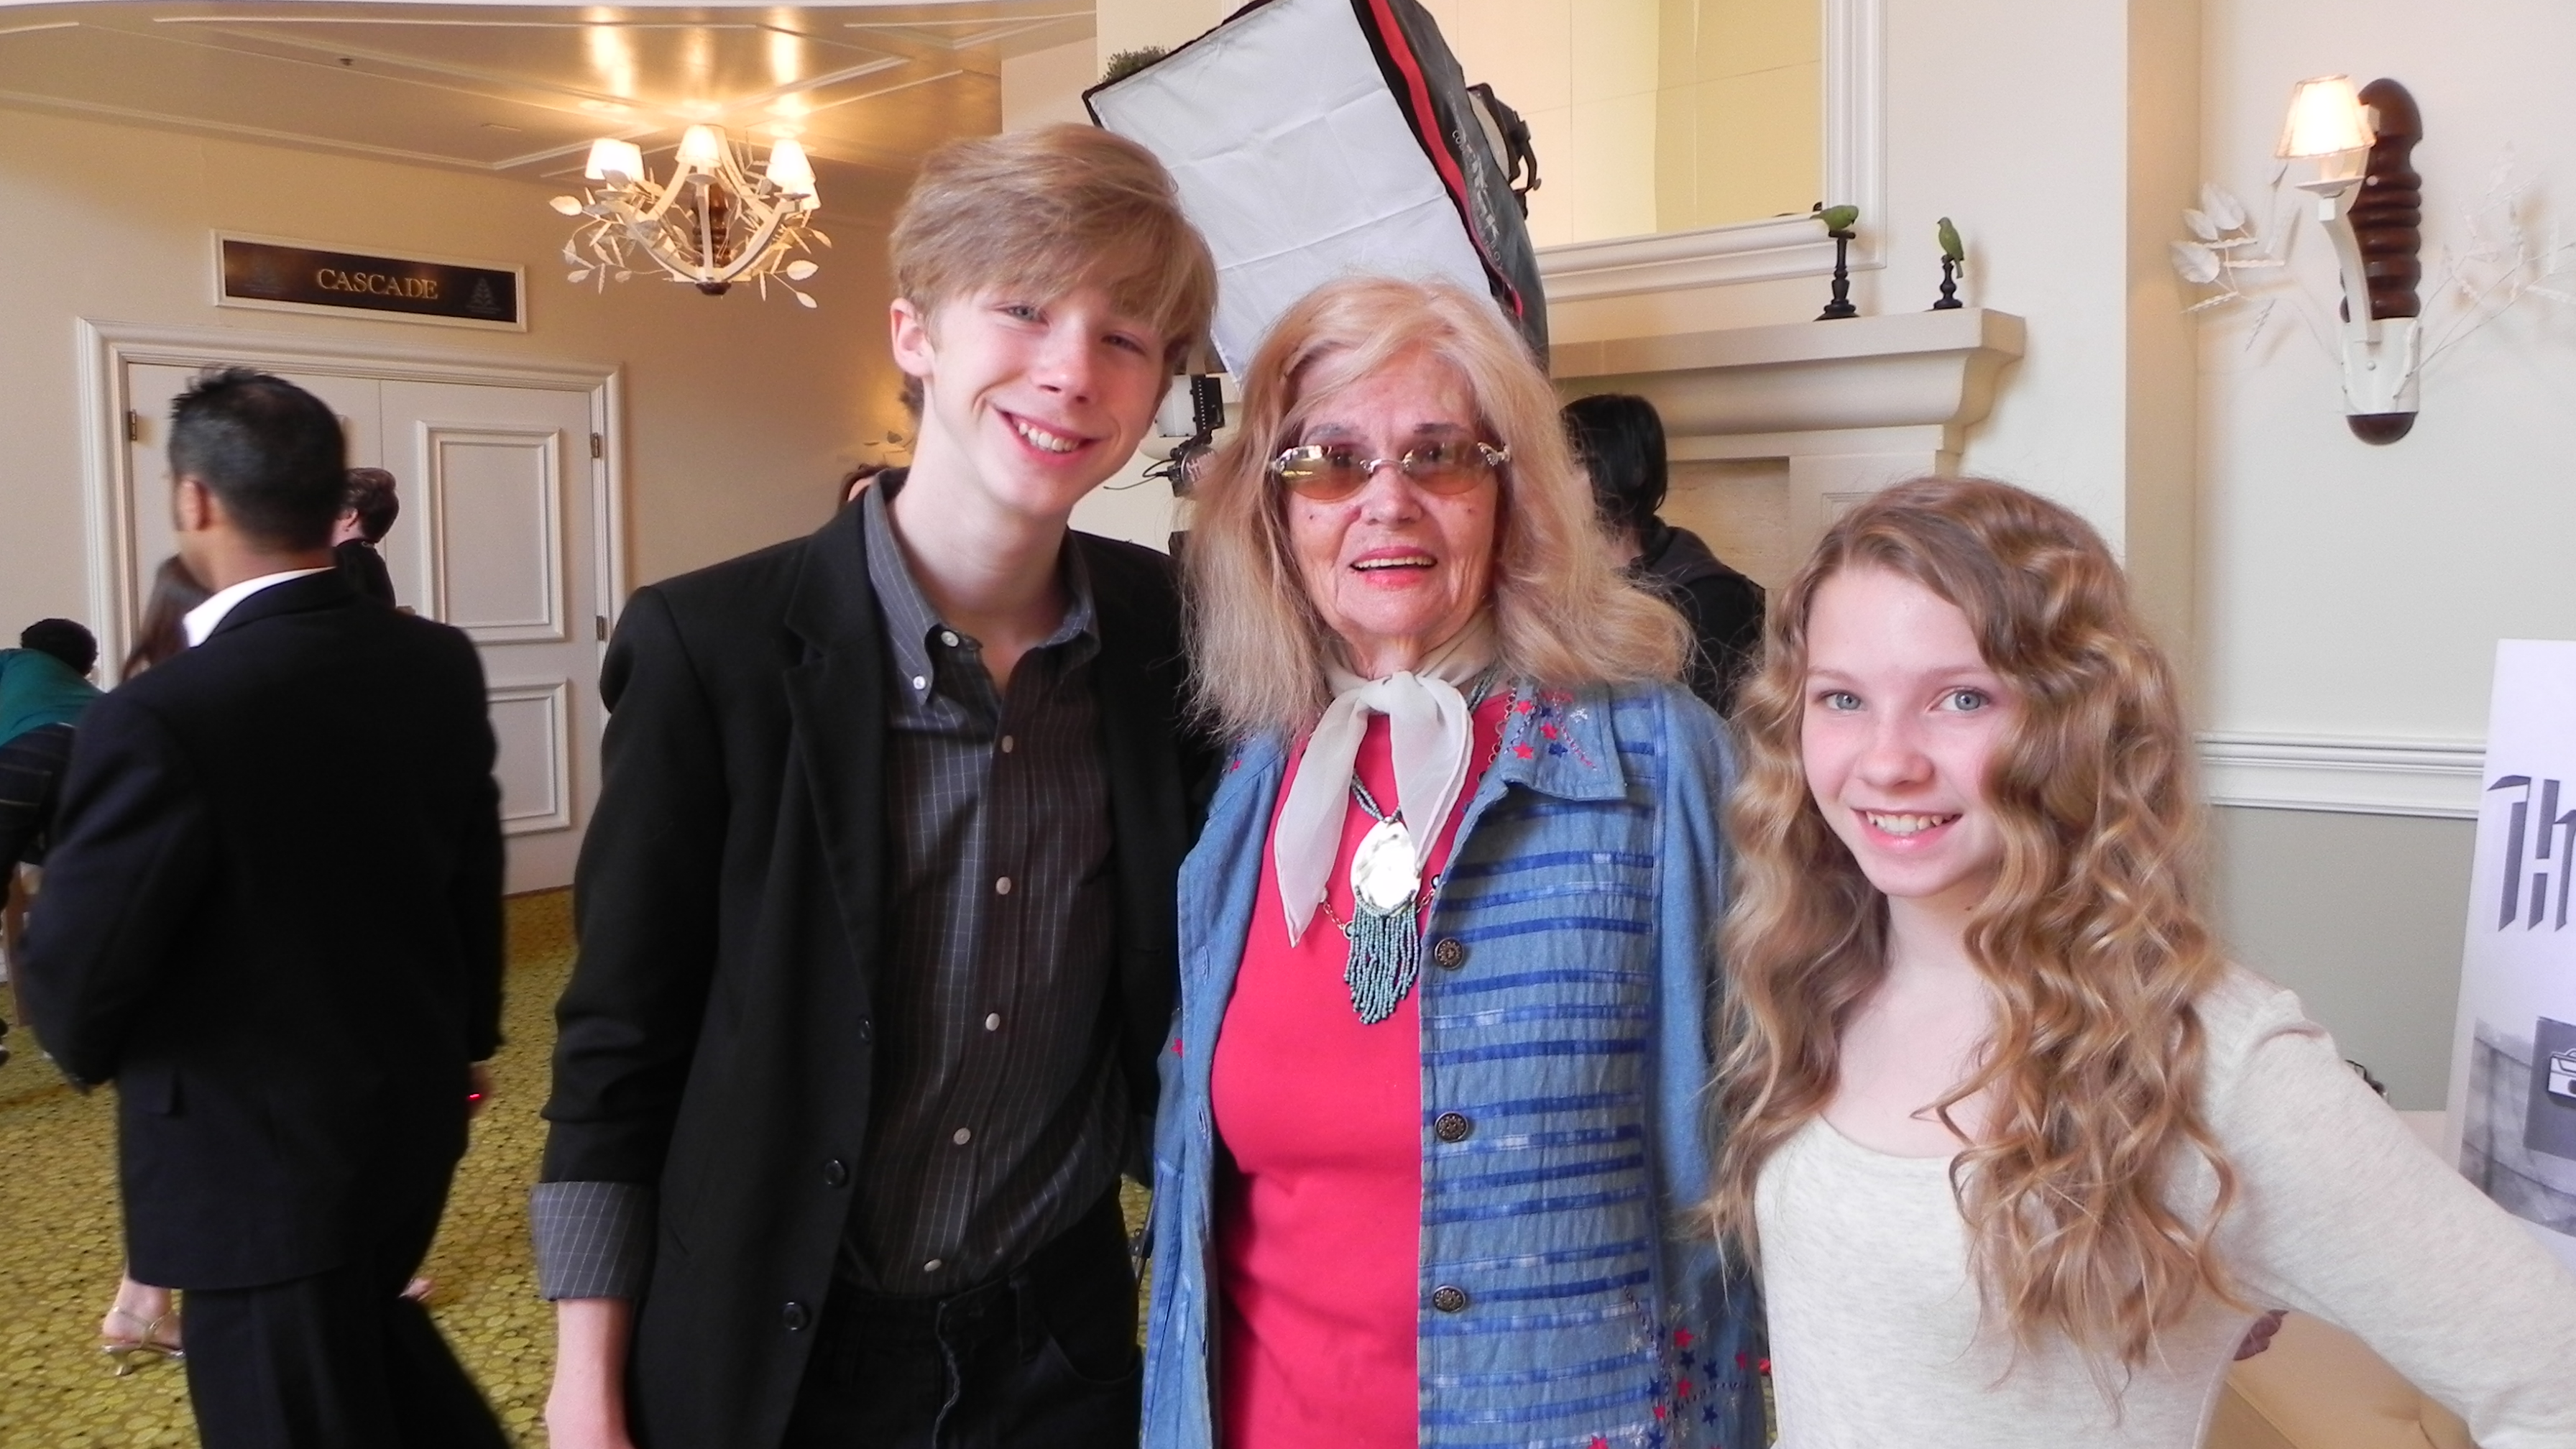 Young Artists Awards 2012. Joey and Elise Luthman with Maureen Dragone, founder of YAA.